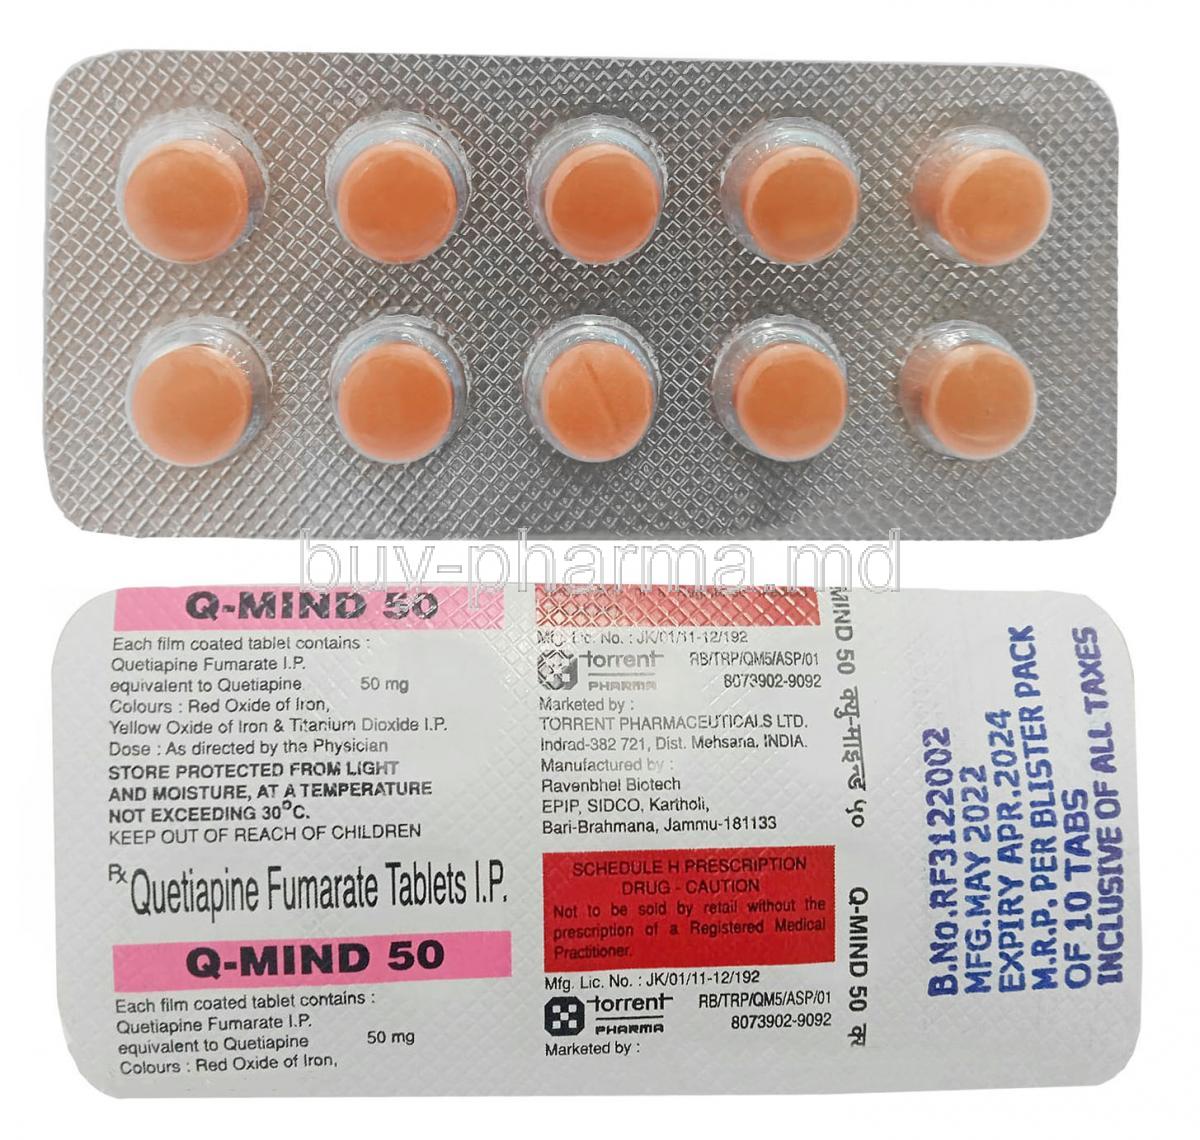 Q-Mind, Quetiapine 50 mg, Torrent Pharma, Blisterpack front and back view